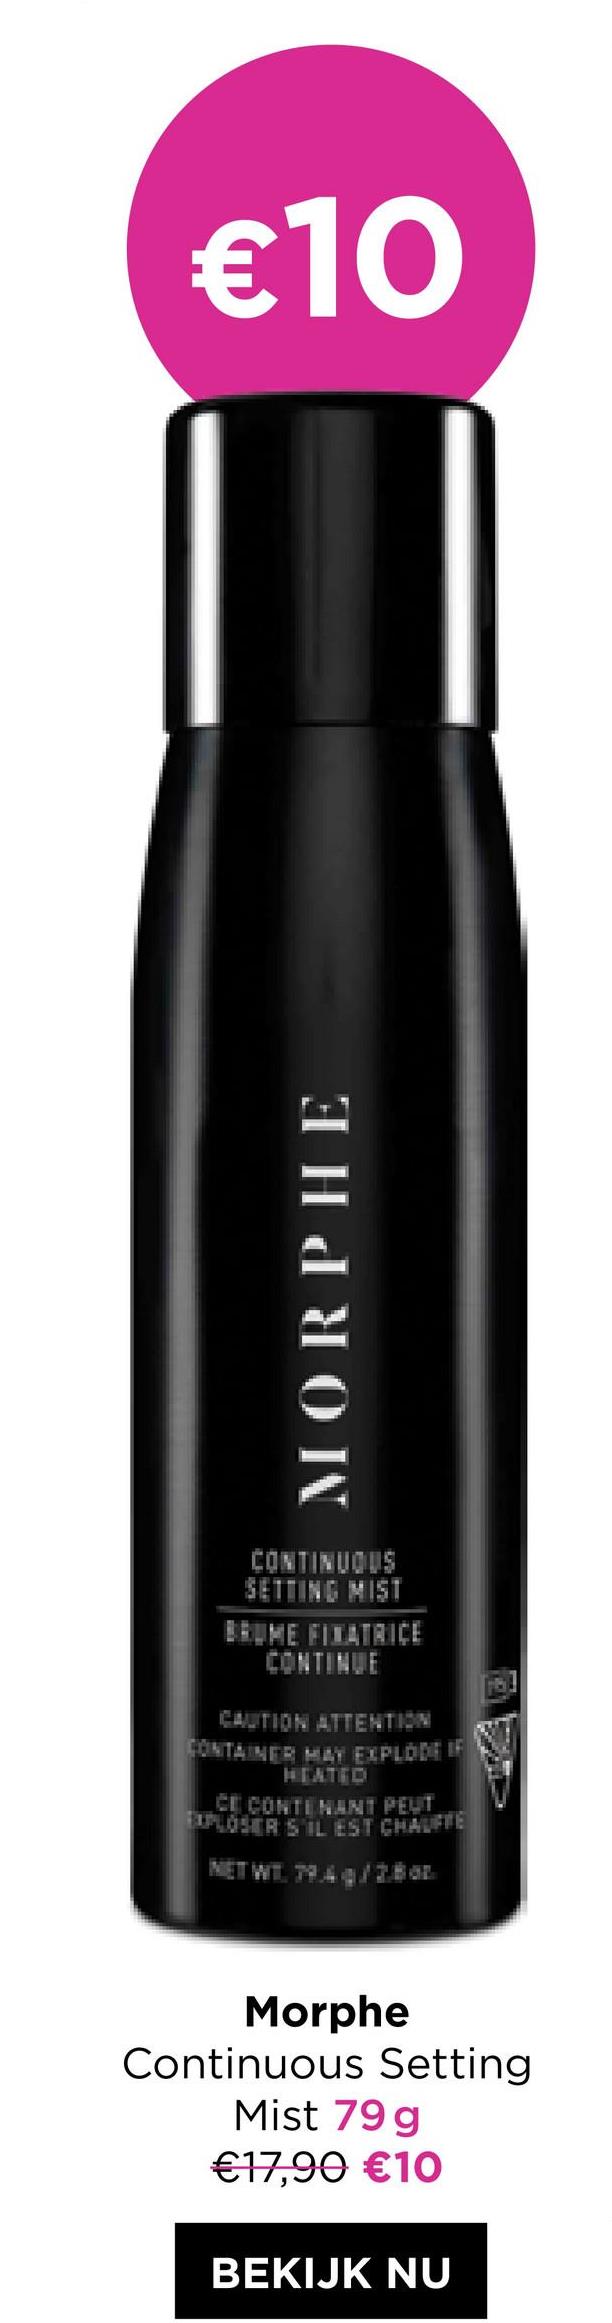 €10
MORPHE
SETTING MIST
BRUME FIXATRICE
CONTINUE
CAUTION ATTENTION
CONTAINER MAY EXPLODE IF
HEATED
CE CONTENANT PEUT
EXPLOSERS IL EST CHAUFFE
NET WT. 79.4/2.8 oz.
Morphe
Continuous Setting
Mist 79 g
€17,90 €10
BEKIJK NU